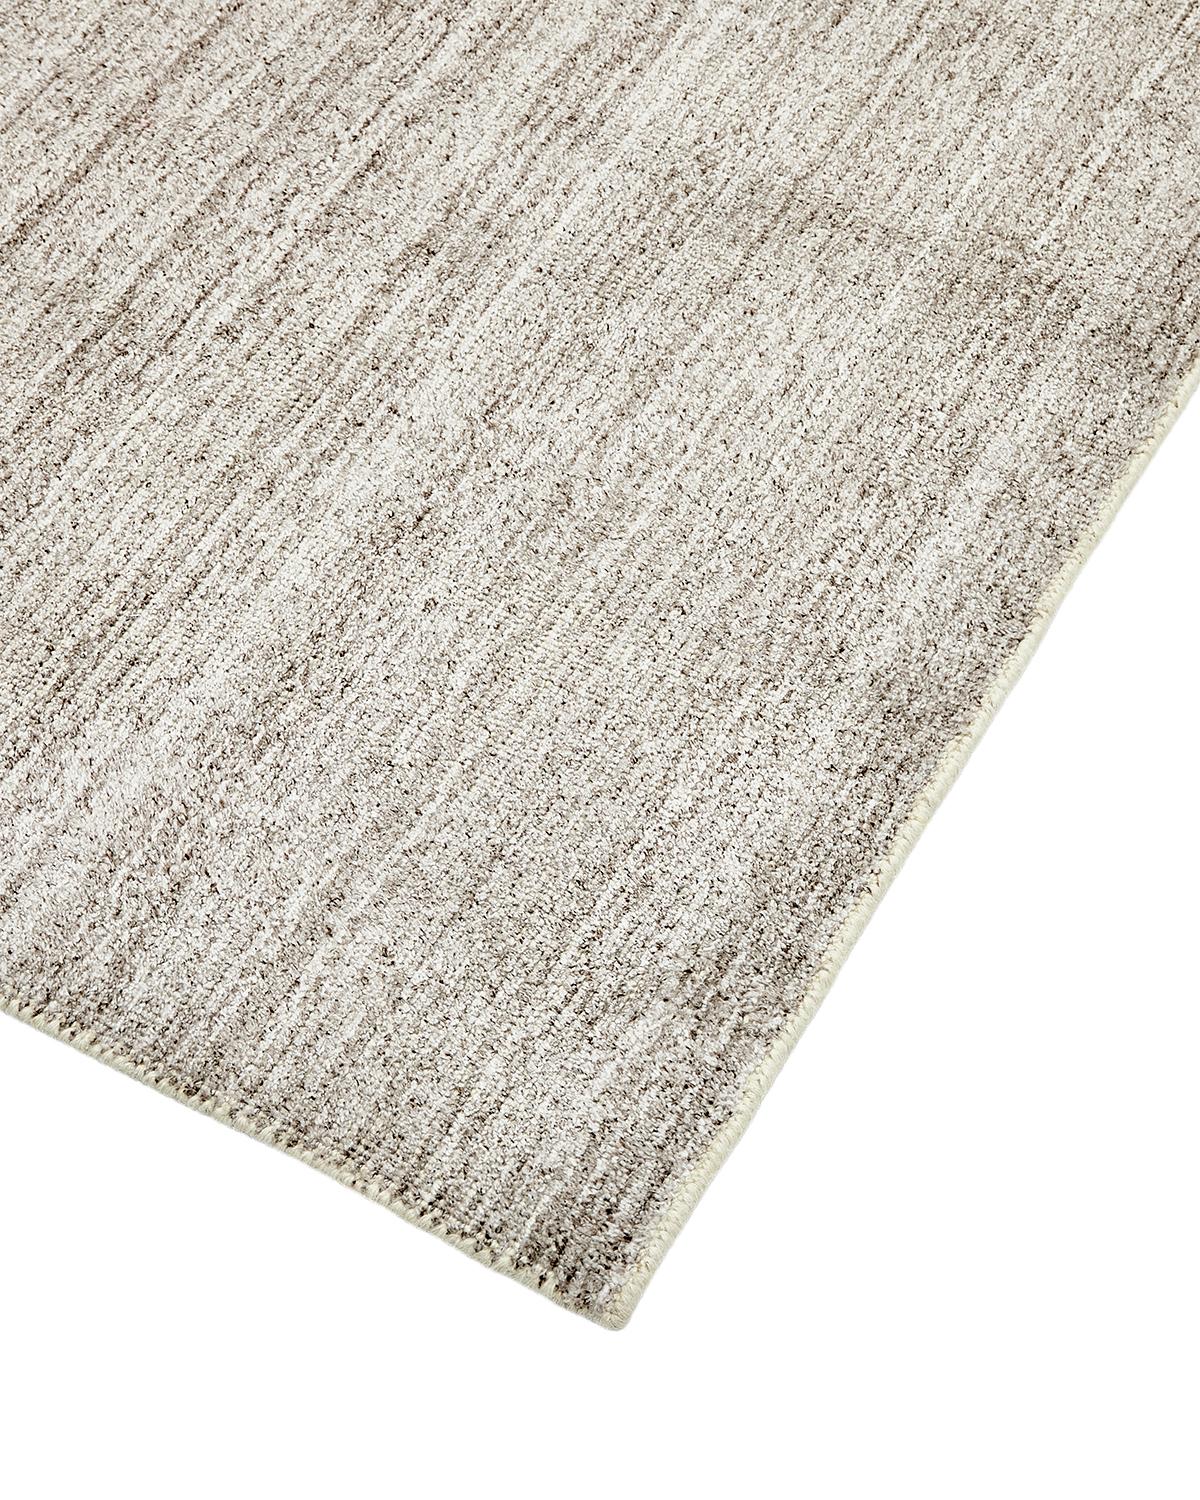 Tone-on-tone stripes give the Solid collection depth and sophistication. These rugs introduce an unexpected but welcome jolt of color into an otherwise neutral space. Handcrafted by skilled artisans in India, they will stand up to heavy traffic for